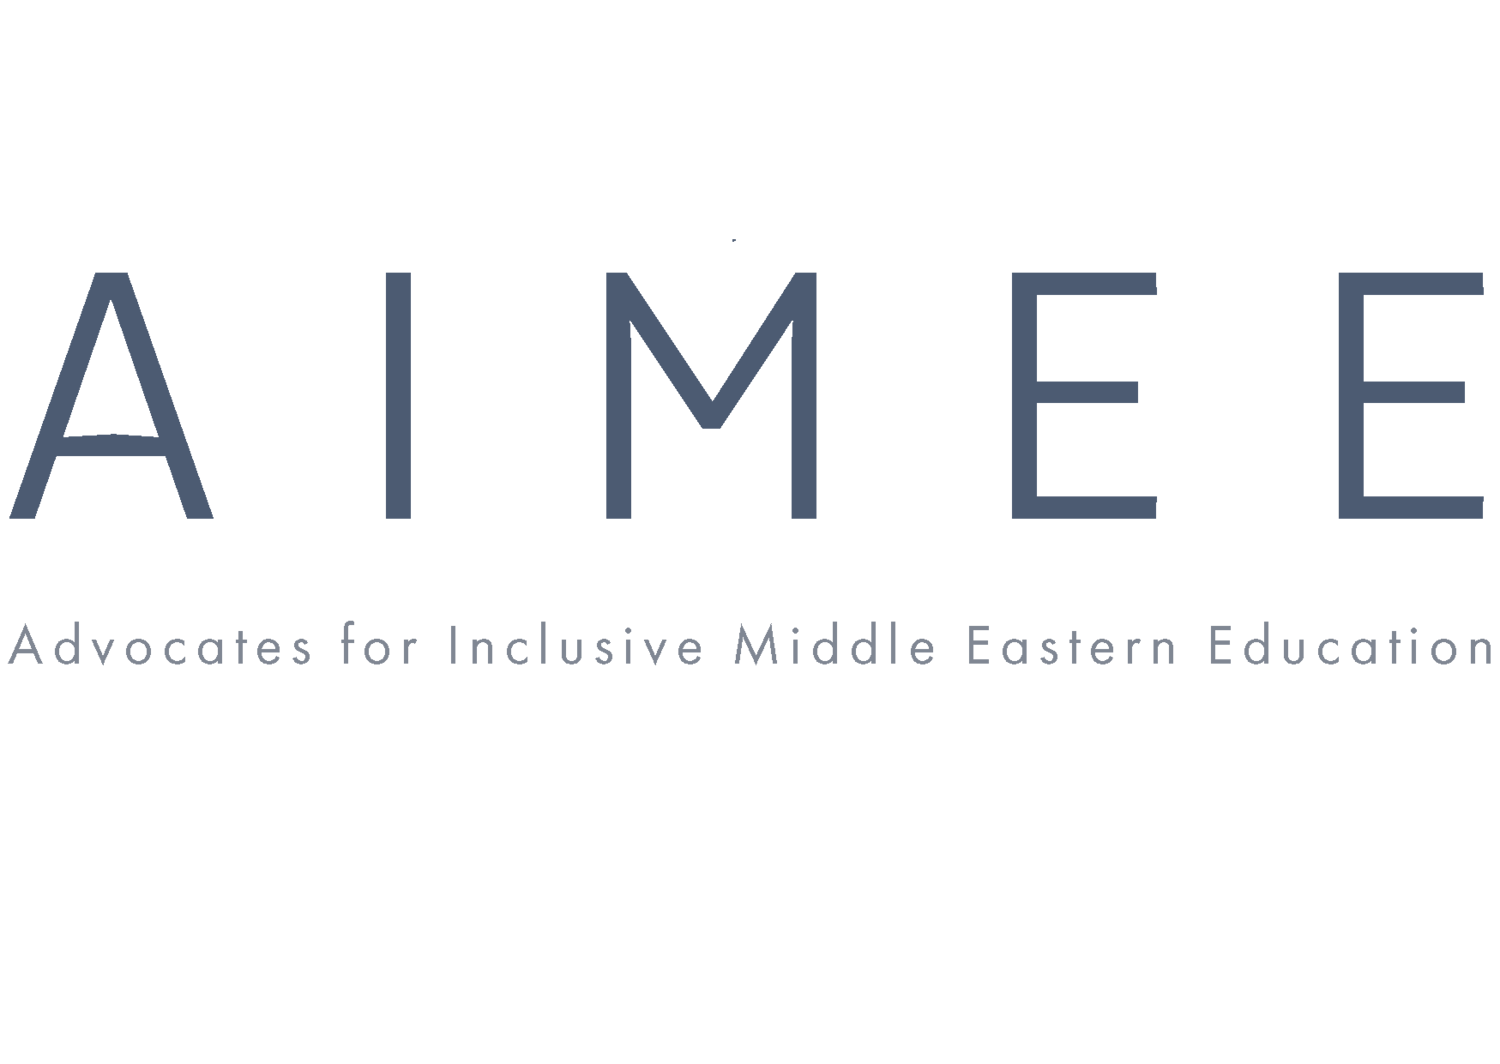 Advocates for Inclusive Middle Eastern Education